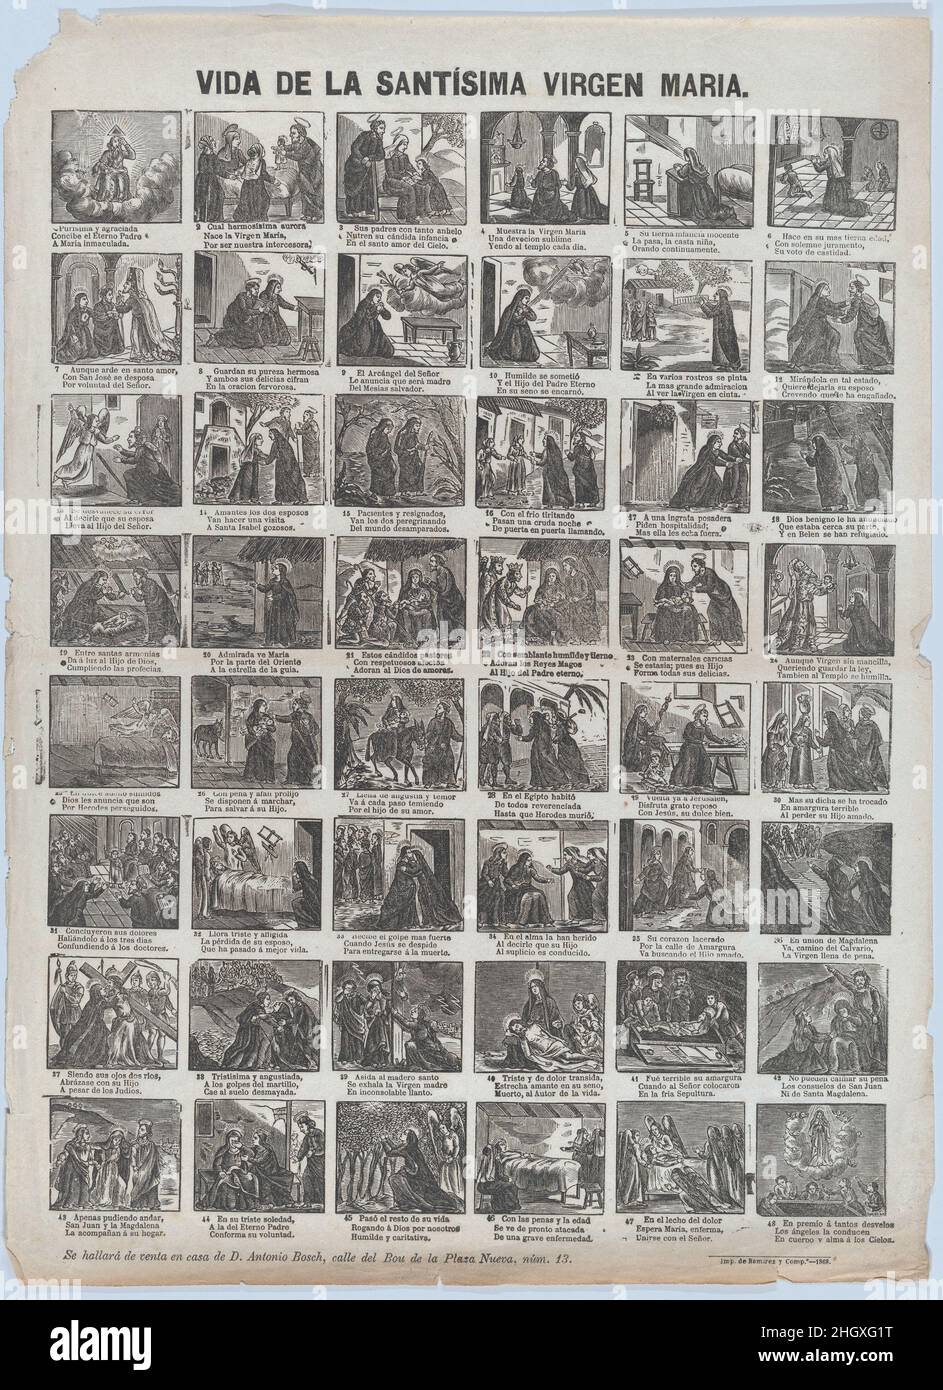 Broadside with 48 scenes of the life of the Virgin 1868 José Noguera. Broadside with 48 scenes of the life of the Virgin. José Noguera (Spanish, 19th century). 1868. Wood engraving. Antonio Bosch (Spanish, active Barcelona, ca. 1860–1880). Prints Stock Photo